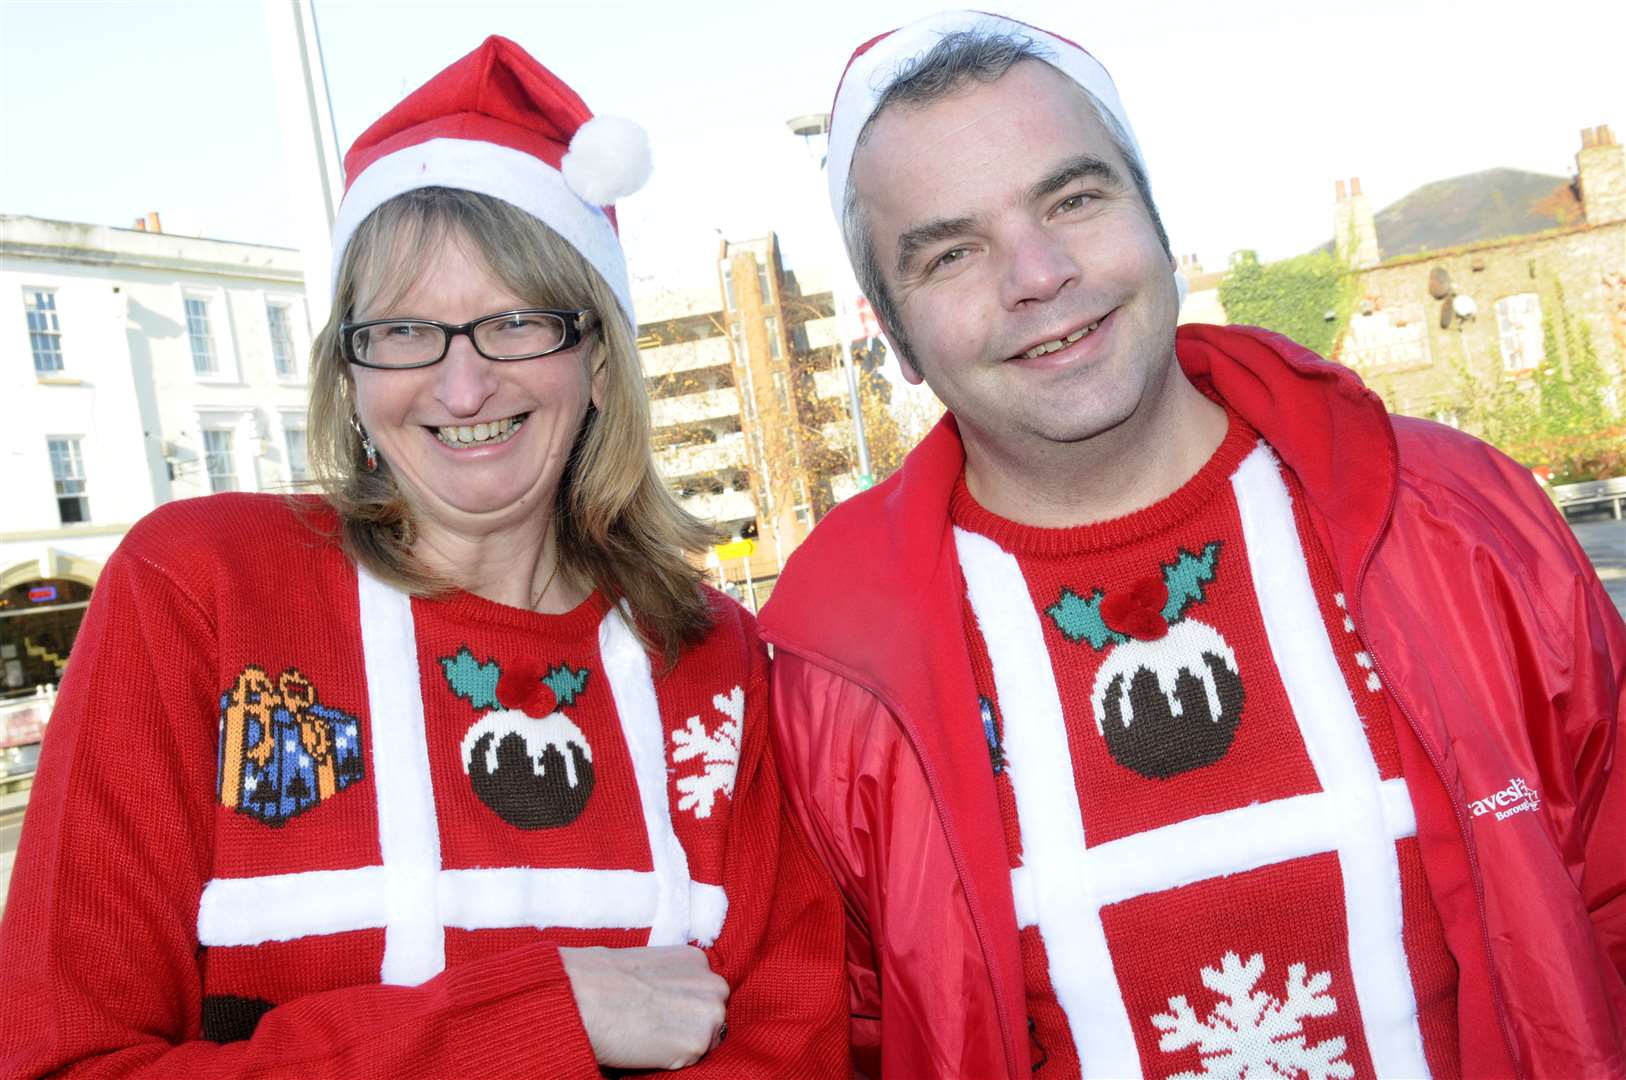 Chris Billington and Chris Inwood were among those who wore festive jumpers for a previous world record bid in Gravesend